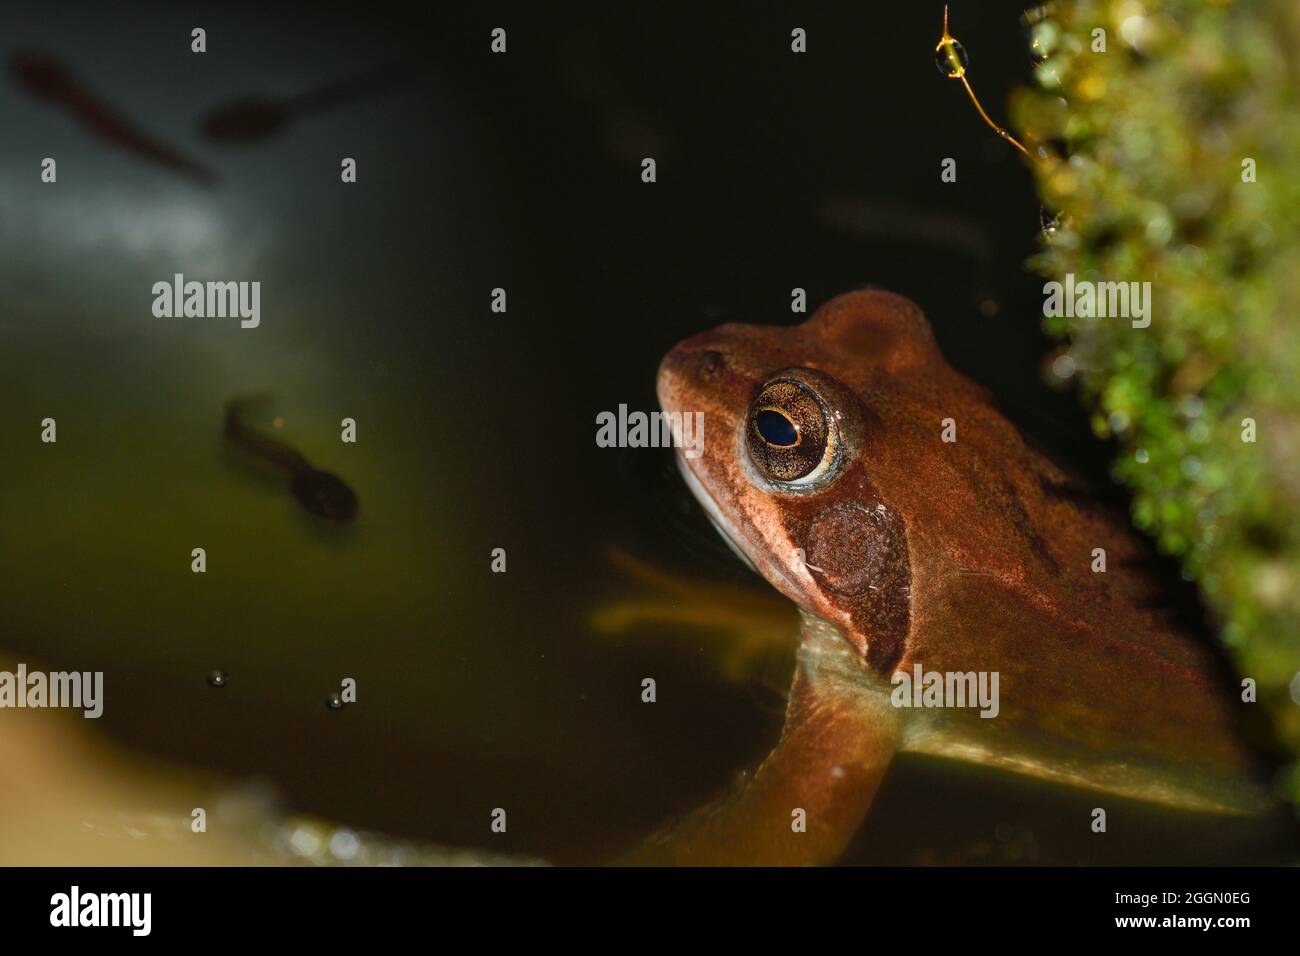 common Frog  in the foreground with the shadow of a tadpole in the background Stock Photo